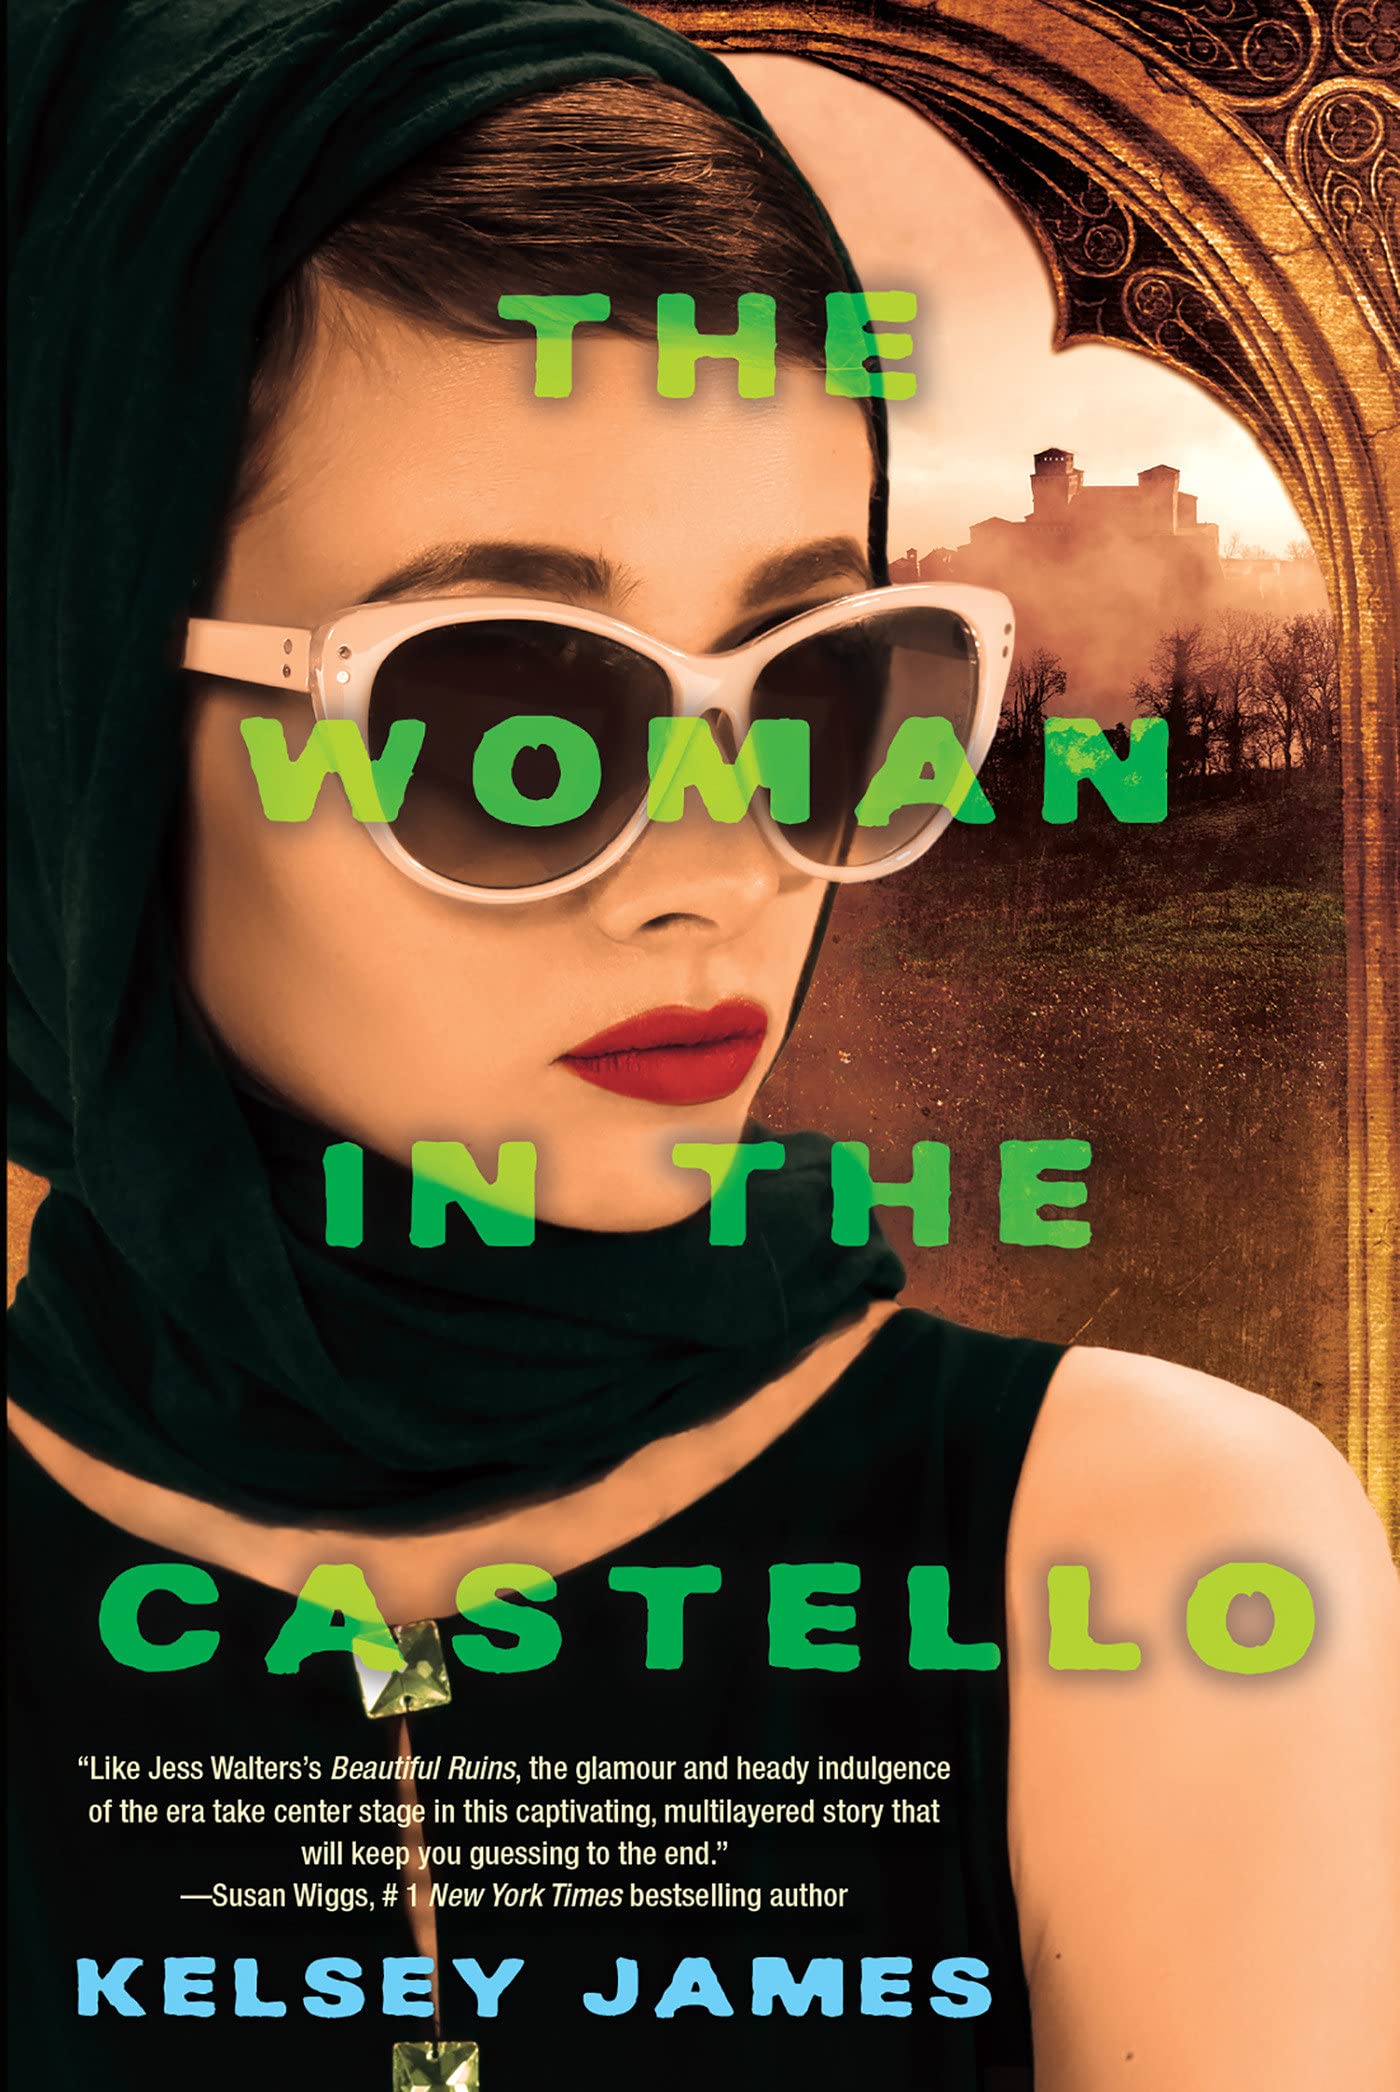 One of our recommended books is The Woman in the Castello by Kelsey James